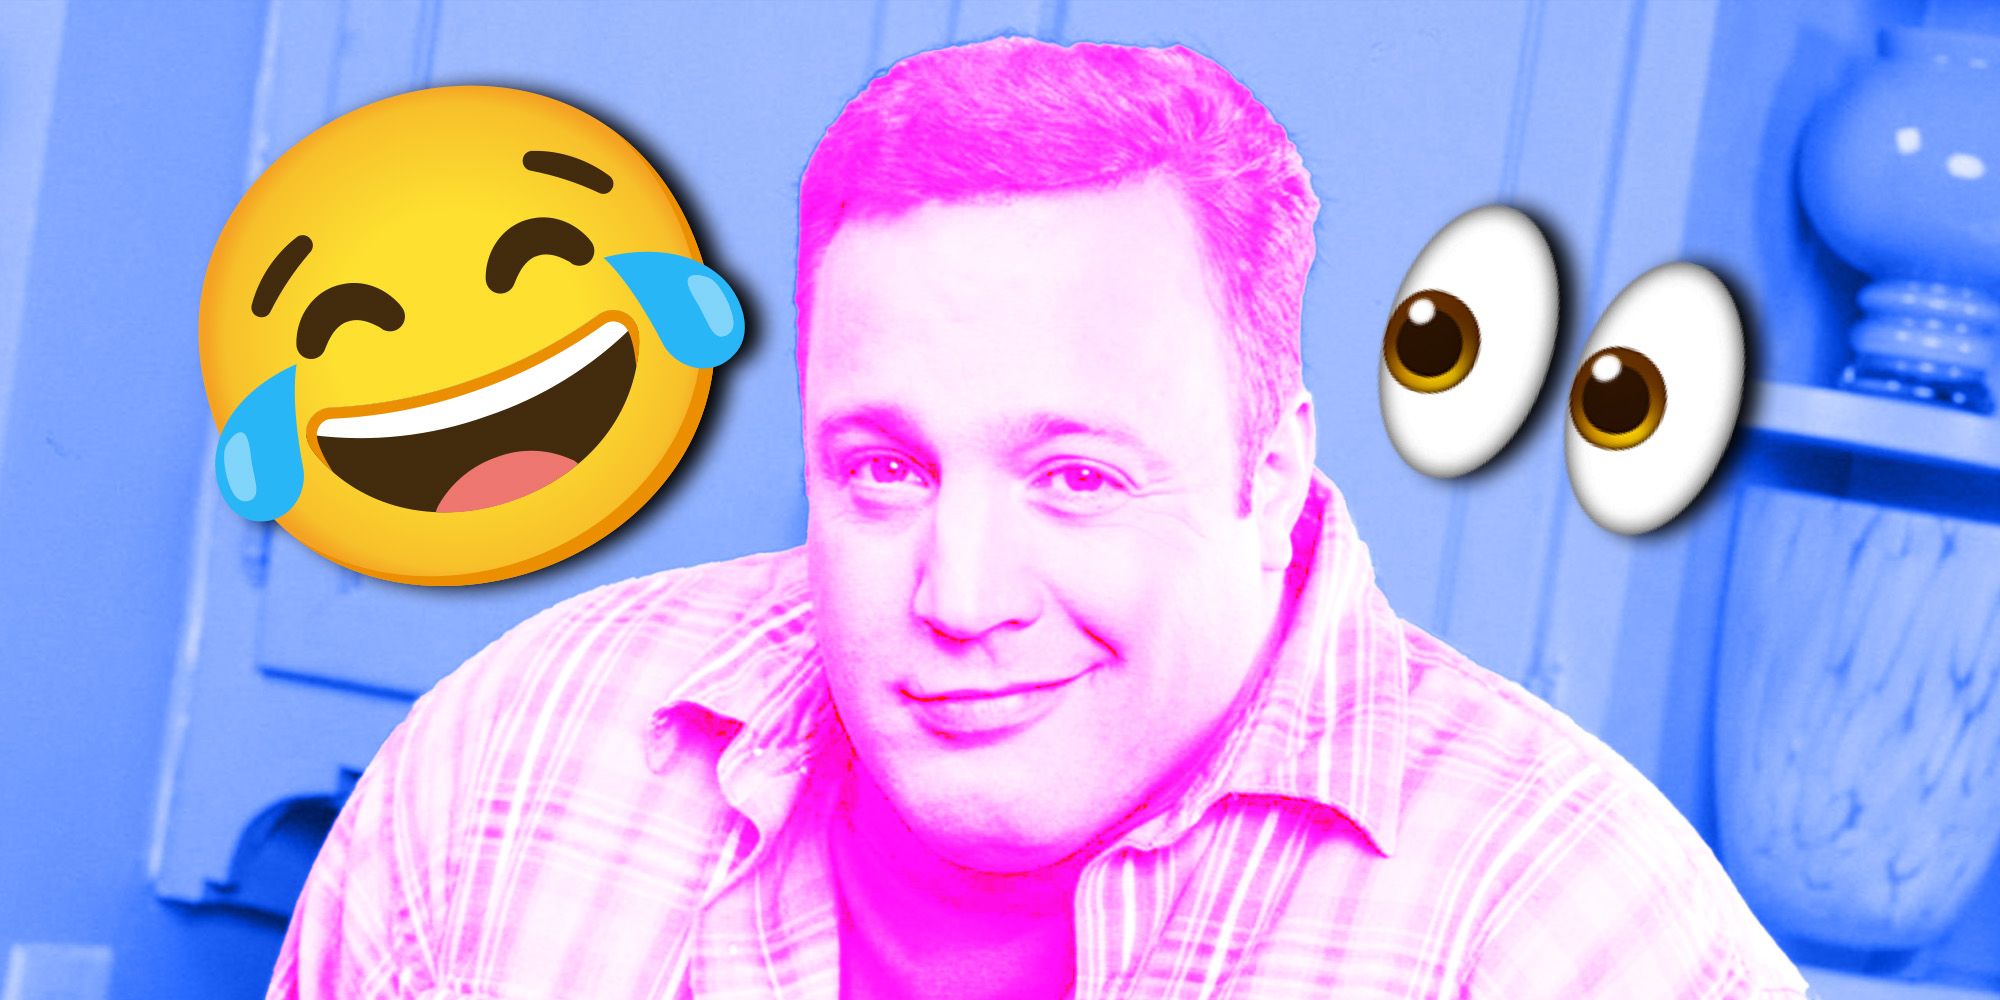 A colorful image of Kevin James in The King of Queens surrounded by Emojis